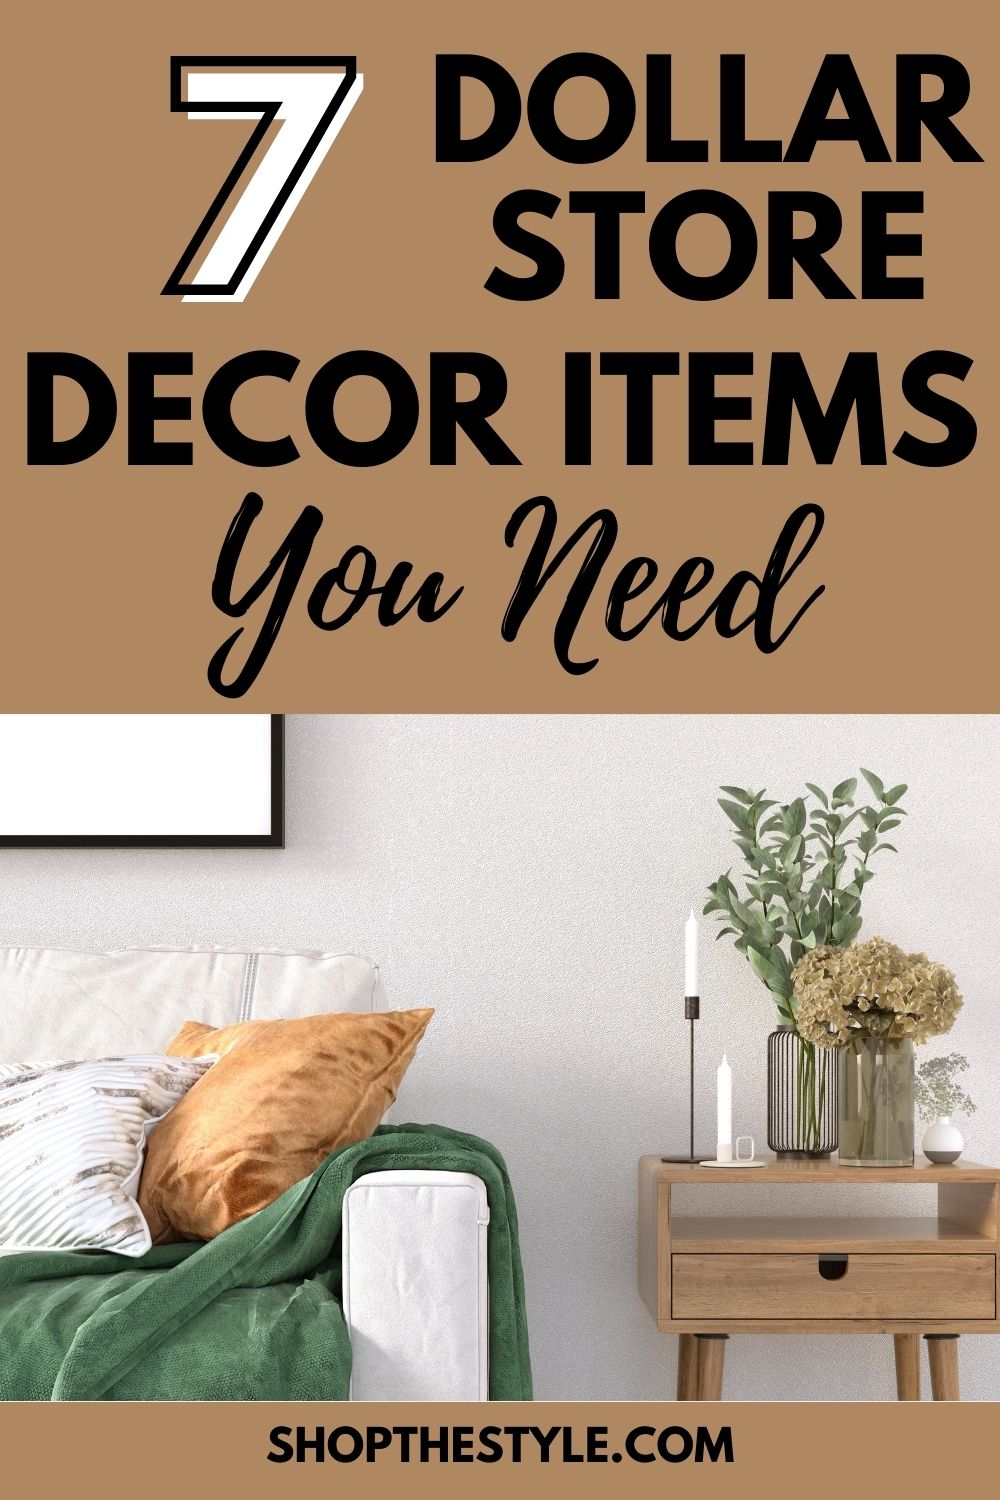 Style for Less: Top Dollar Store Decor Items